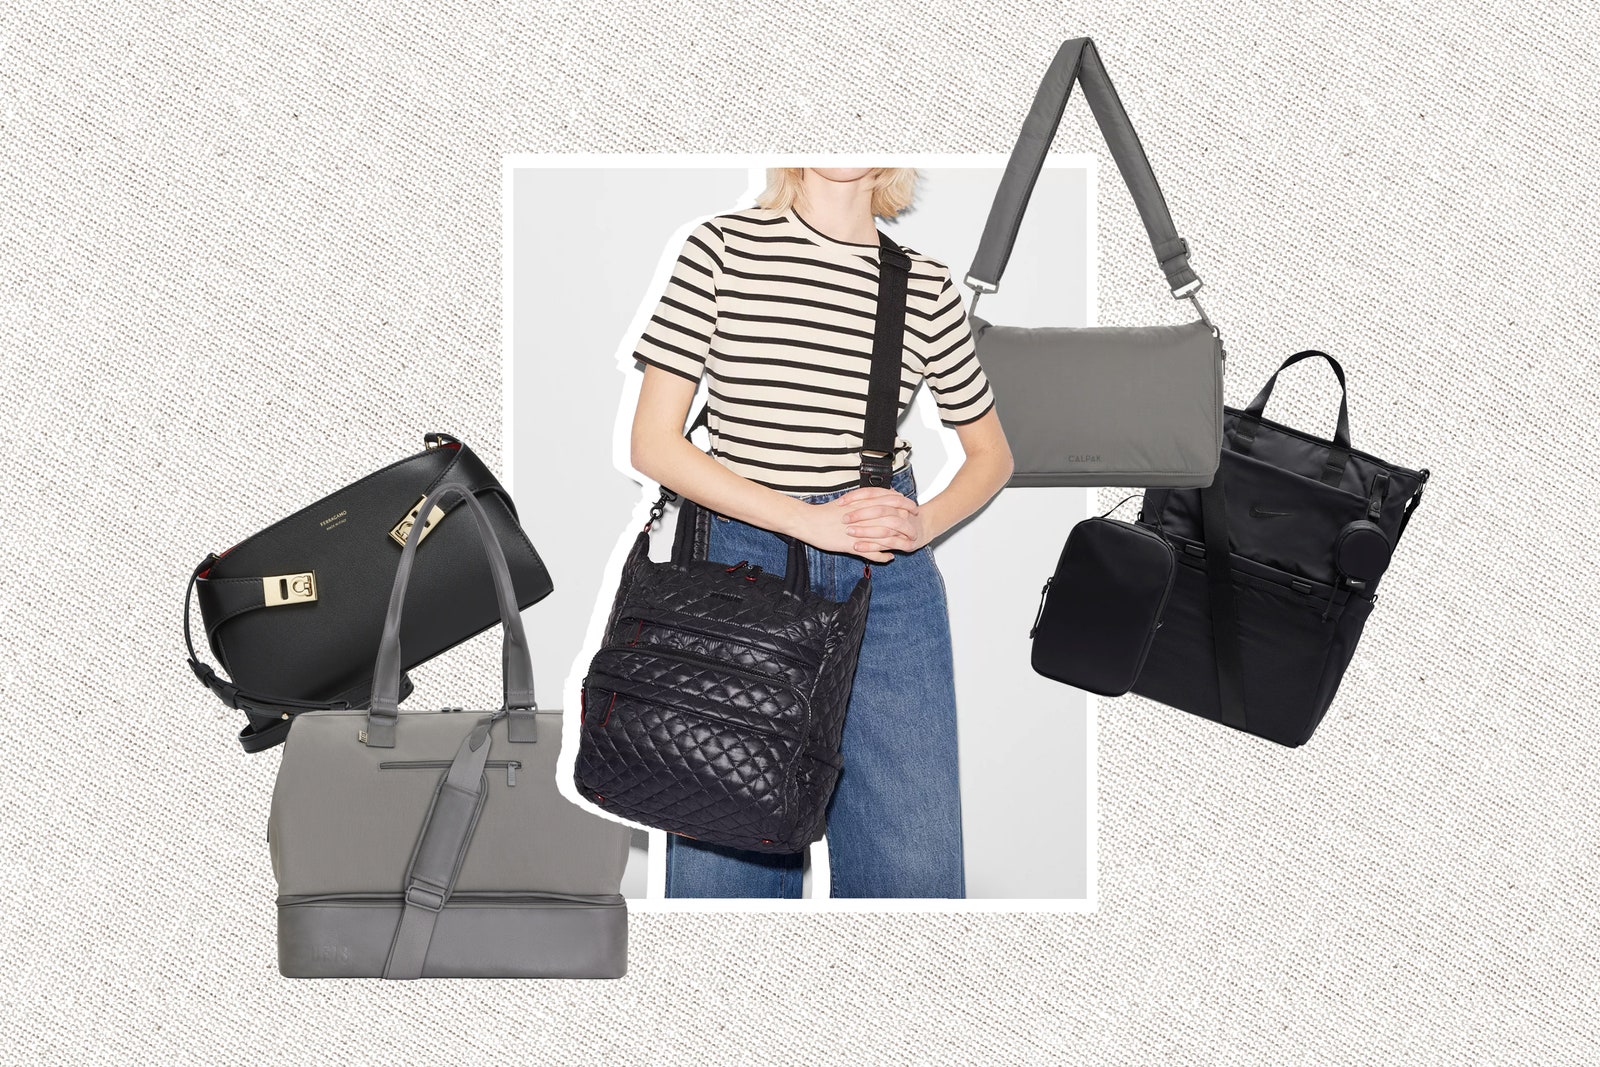 These Two-In-One Convertible Bags Are a Travel Necessity